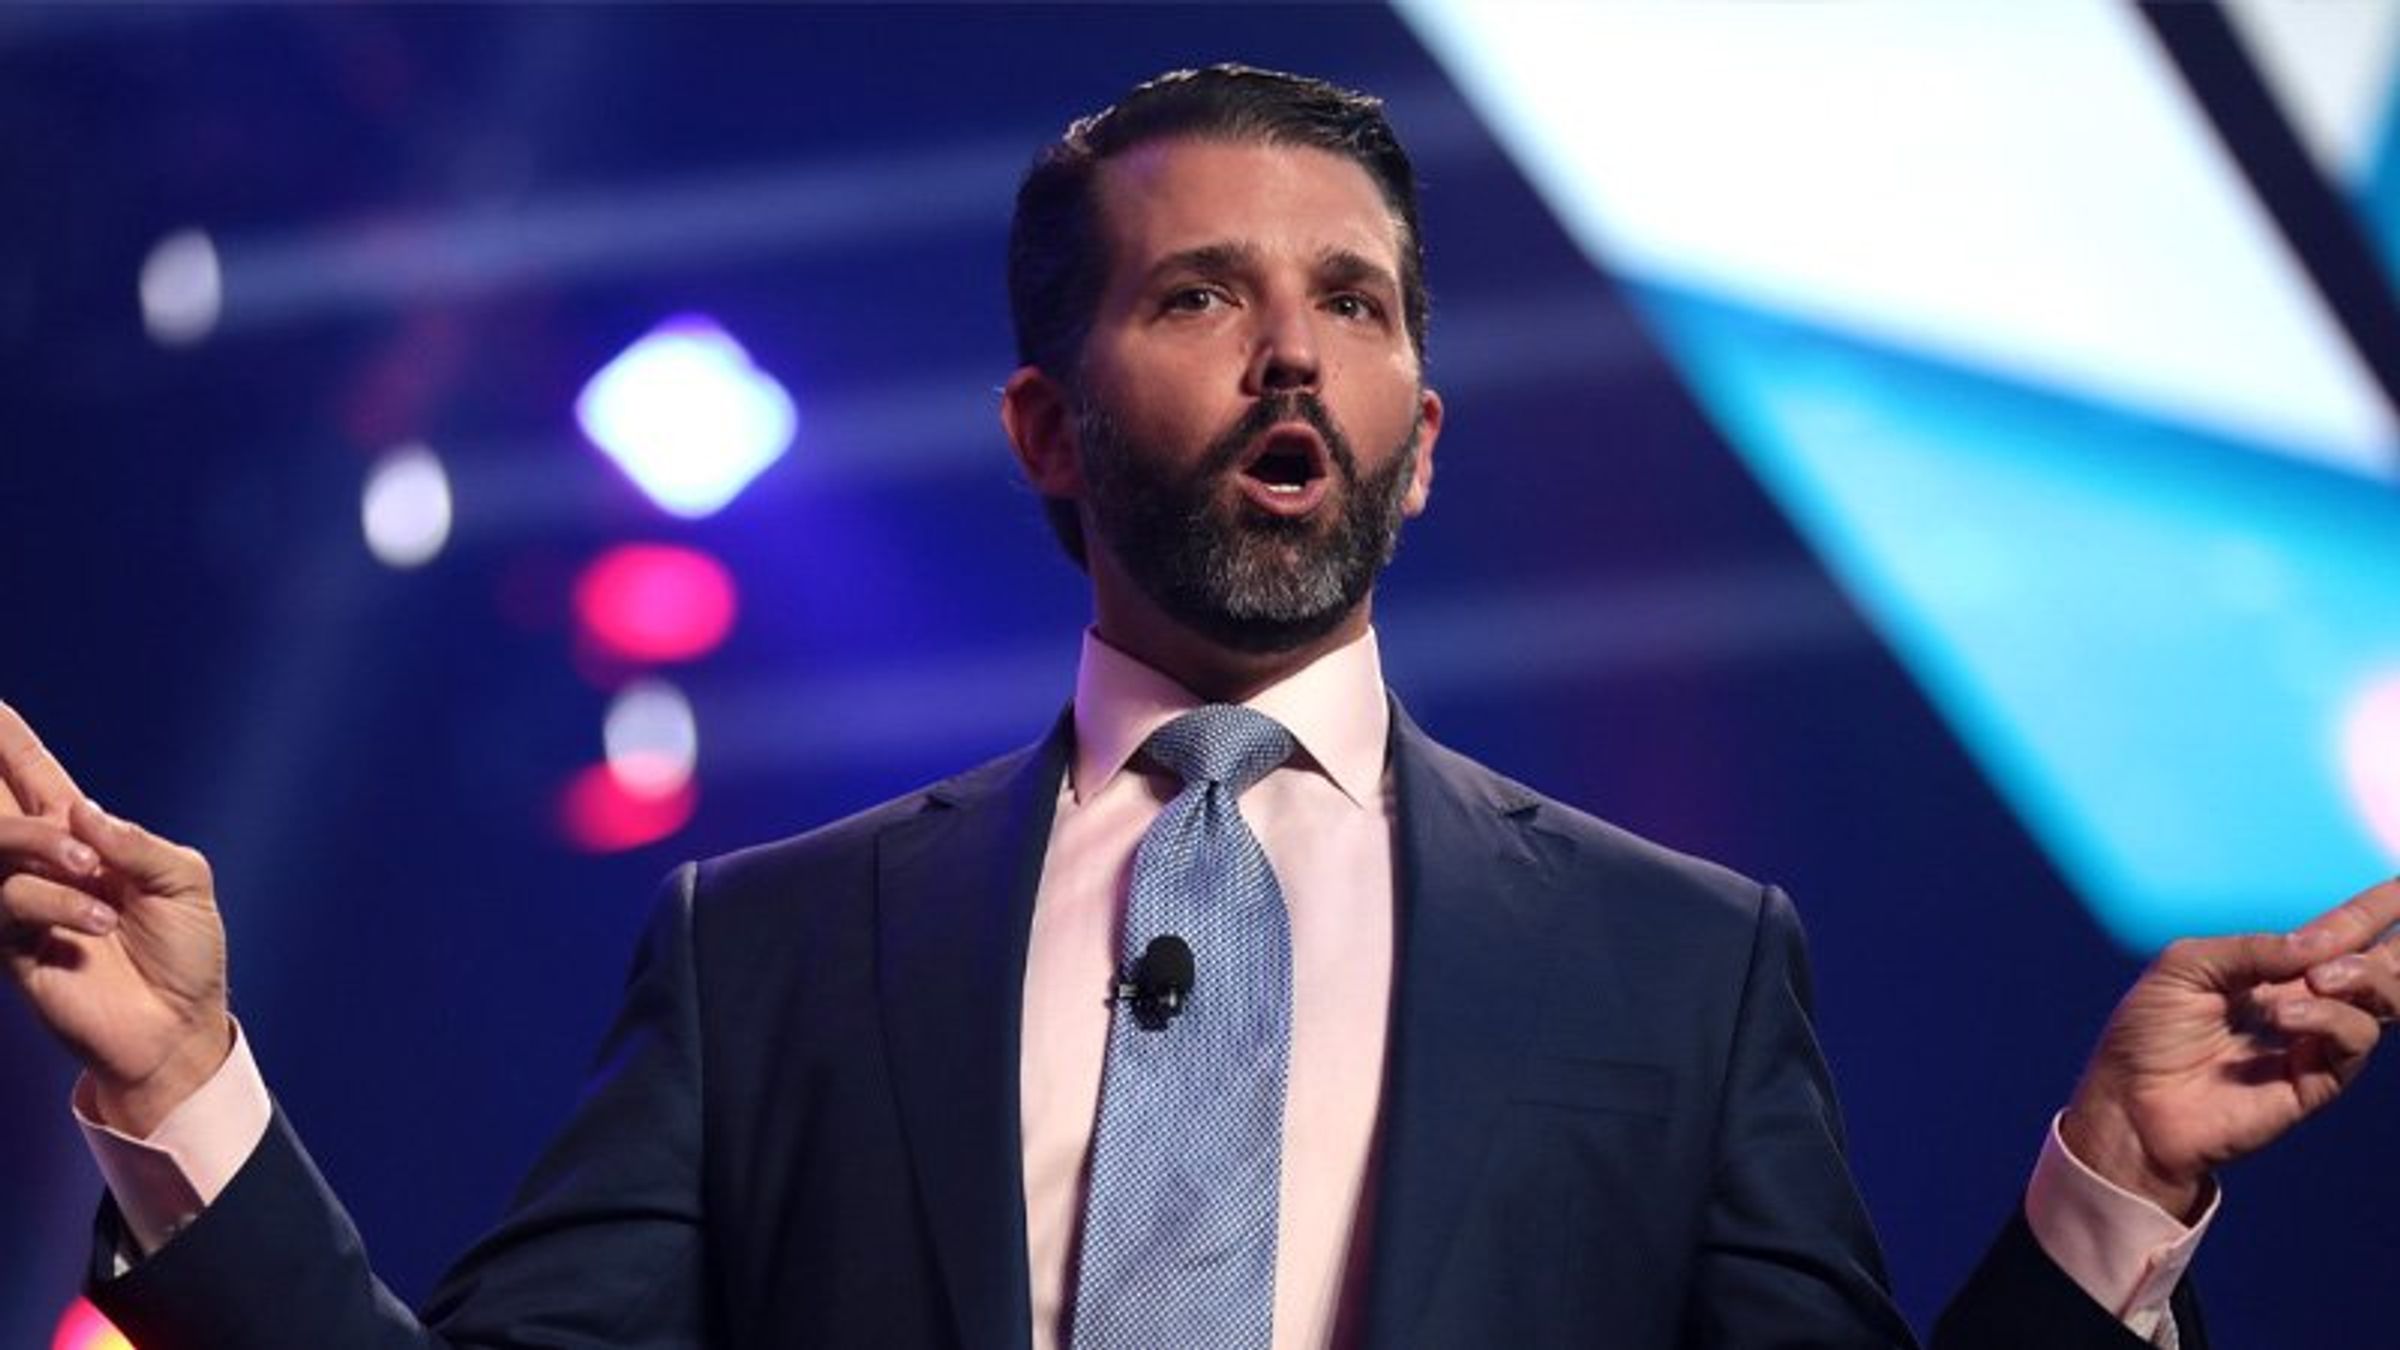 'Phony Moron': Trump Jr. Whines Over 'Projection'